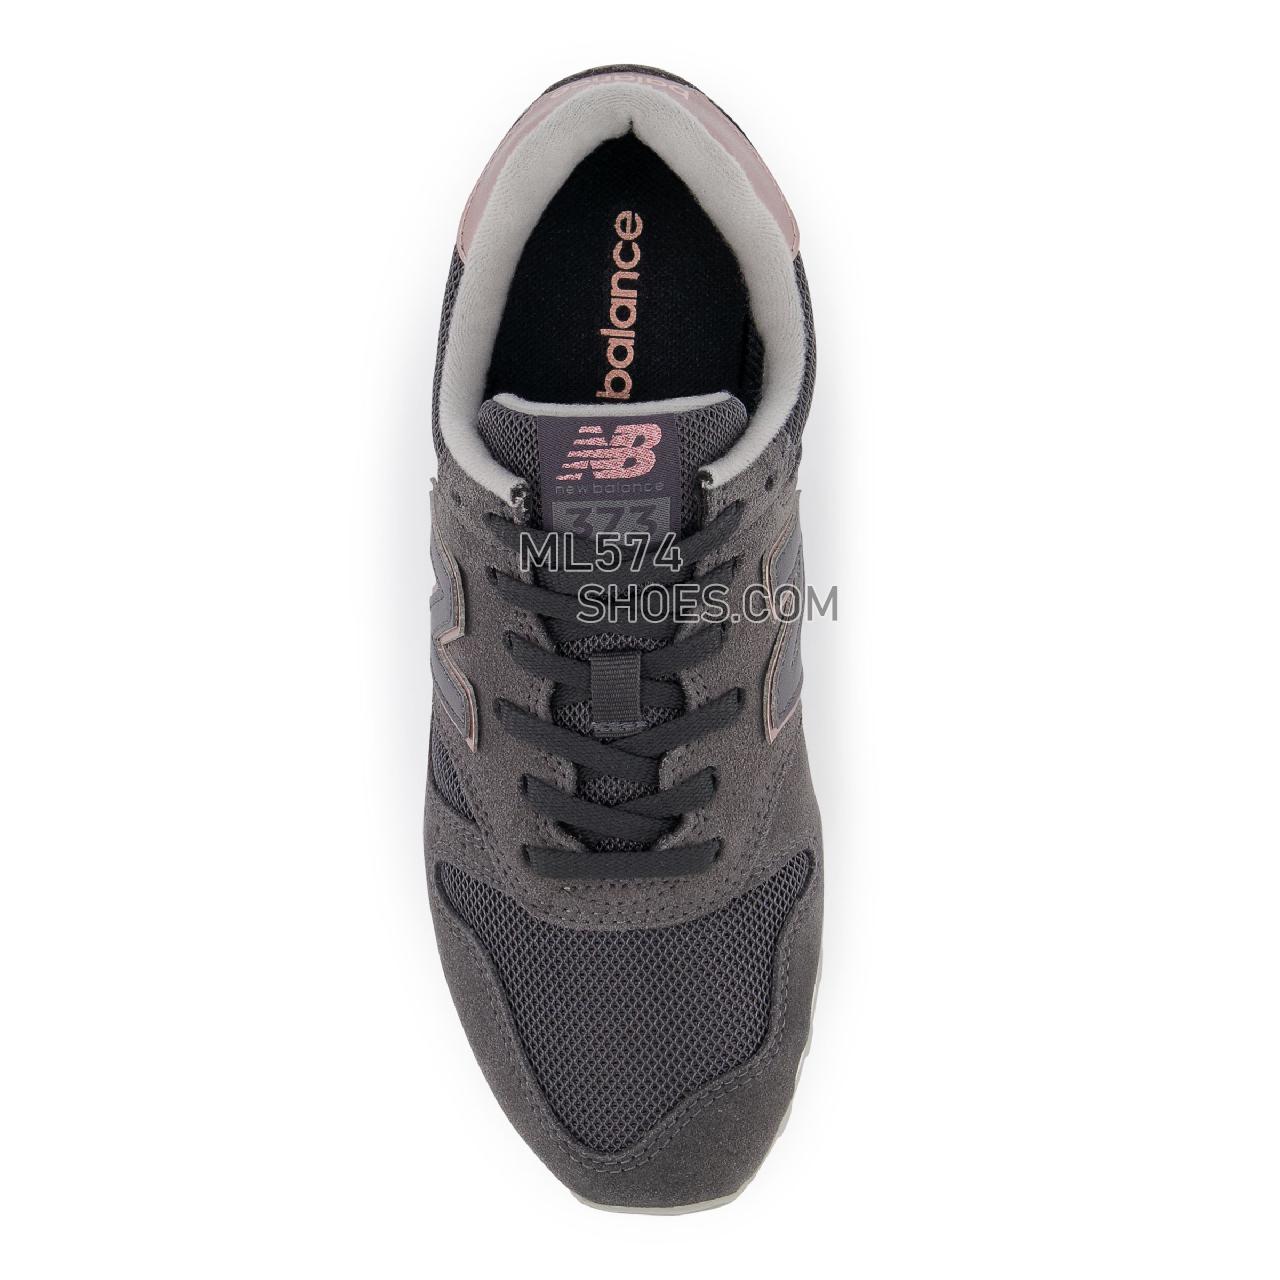 New Balance 373v2 - Women's Classic Sneakers - Magnet with Pink Metallic - WL373TF2